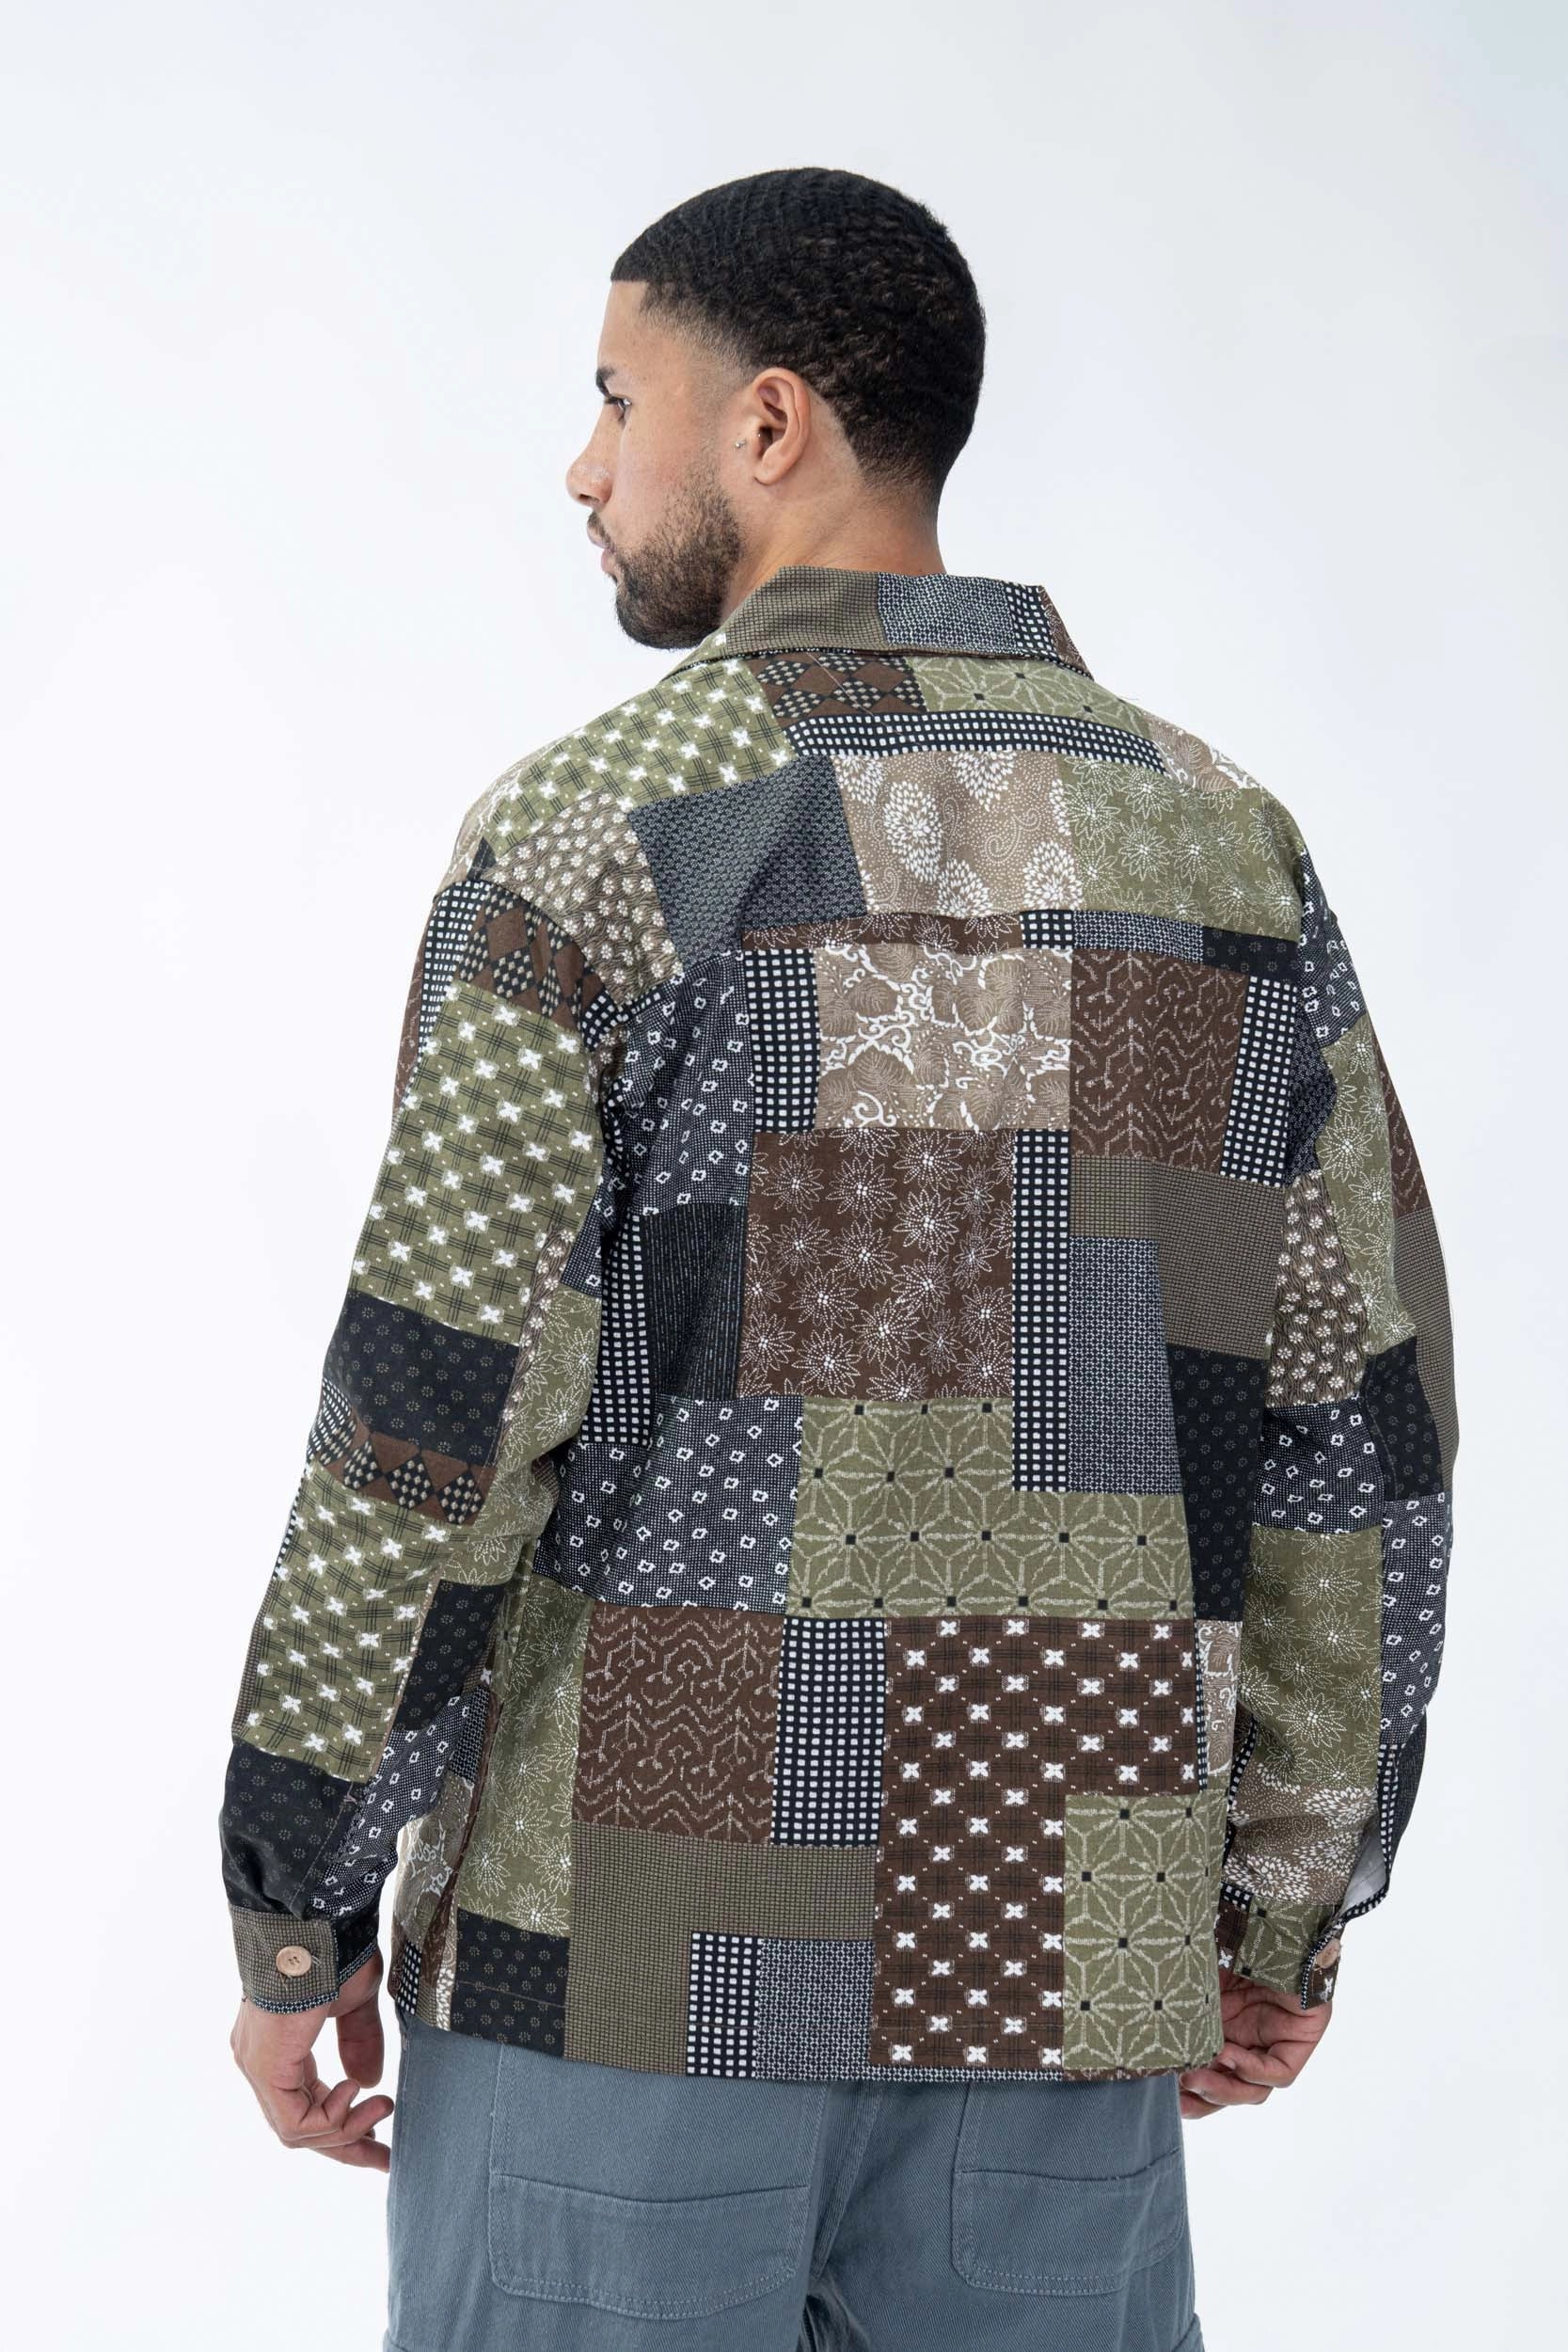 Patchwork long-sleeved shirt in different patterns and fabrics